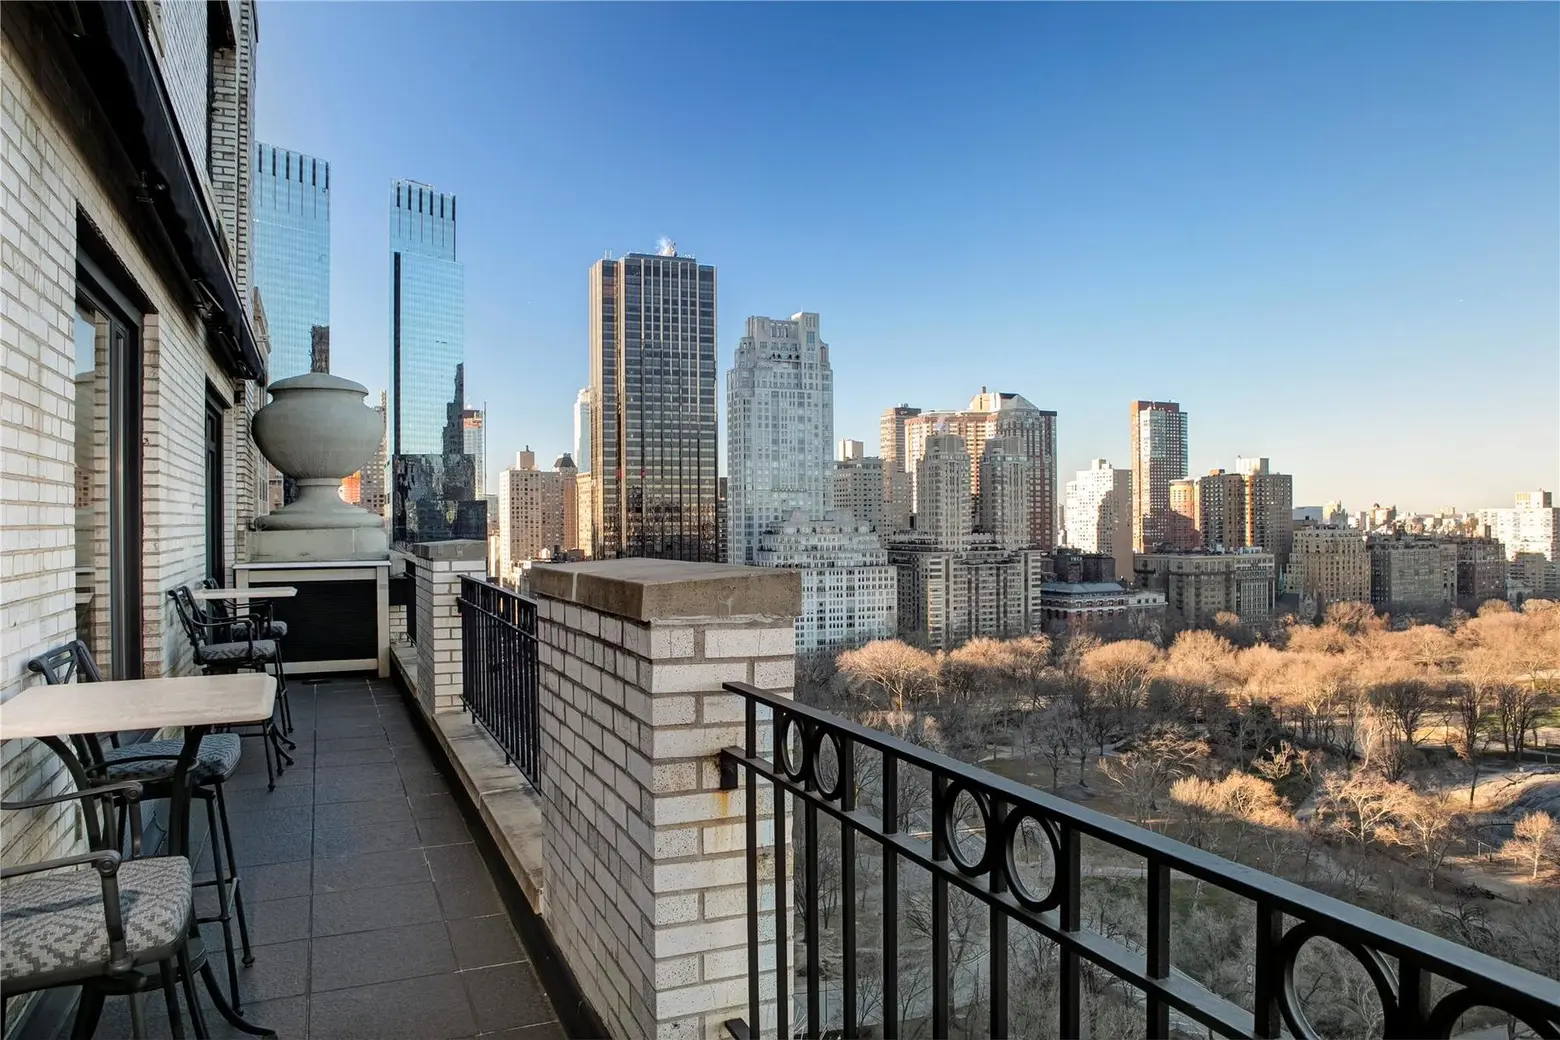 150 Central Park south, Celebrities, Celebrity Real Estate, Hampshire House, Pavarotti, Three tenors, Opera, Manhattan co-op for sale